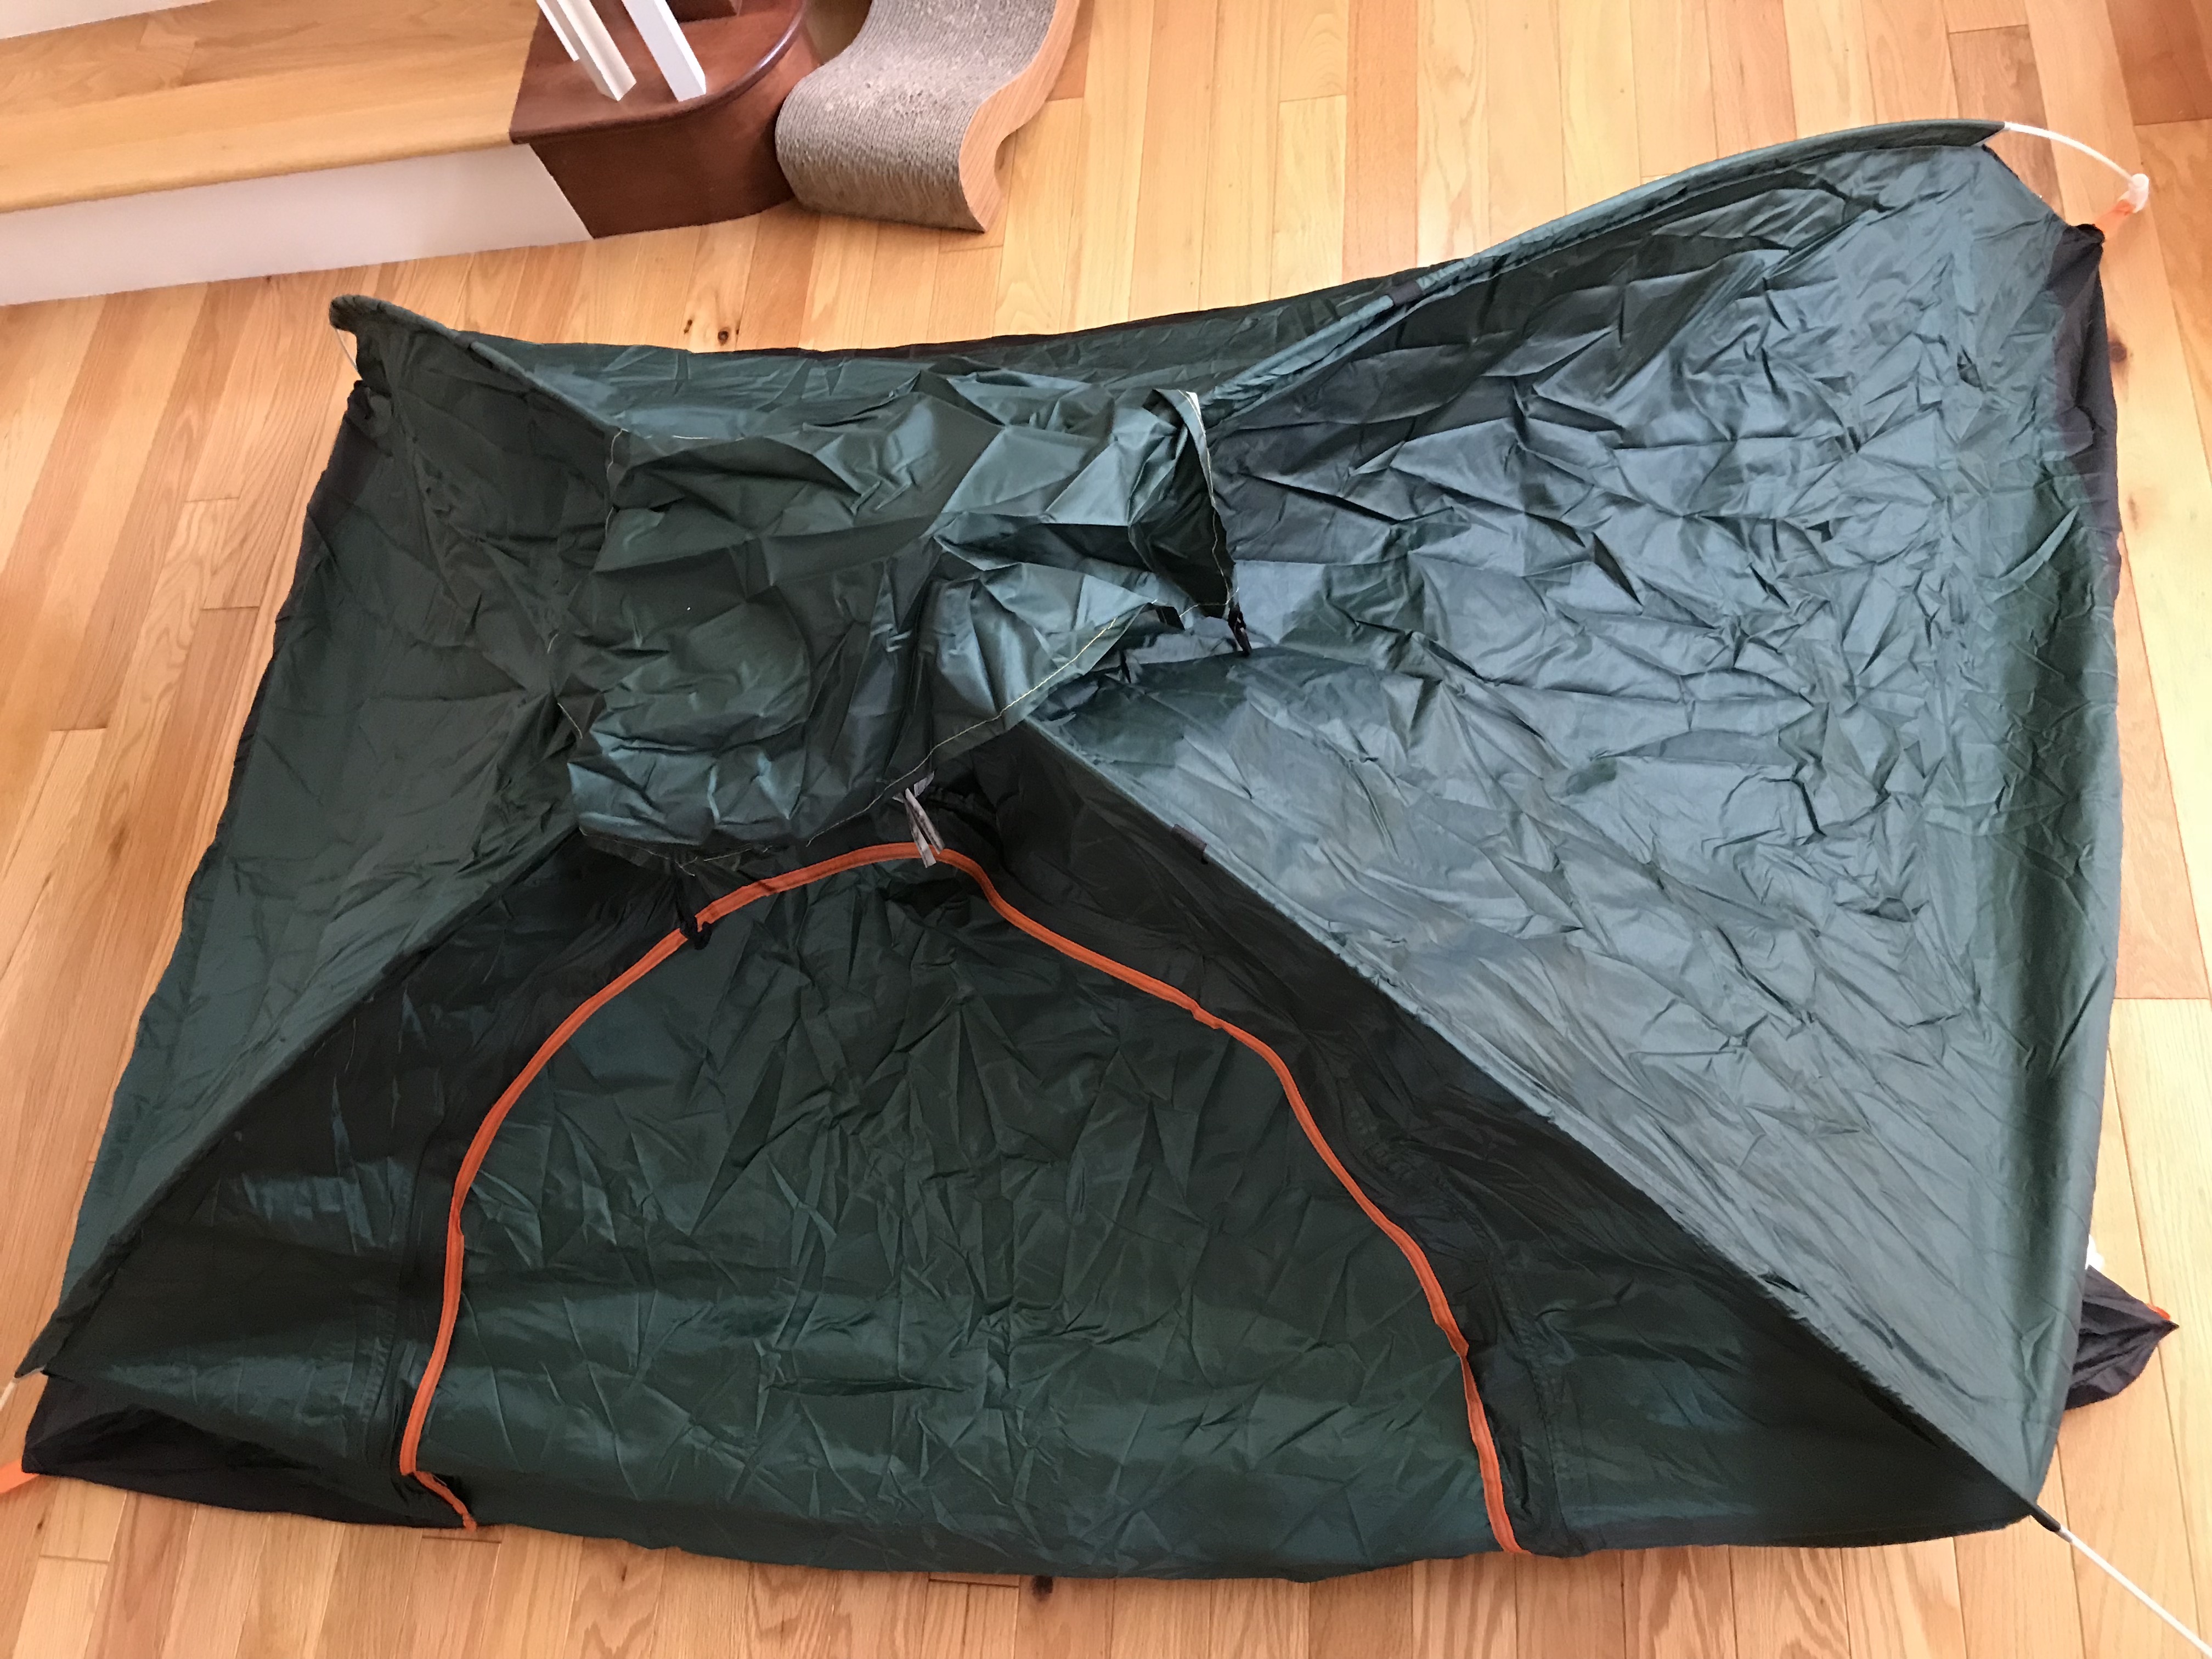 tent that was delivered to me: first picture